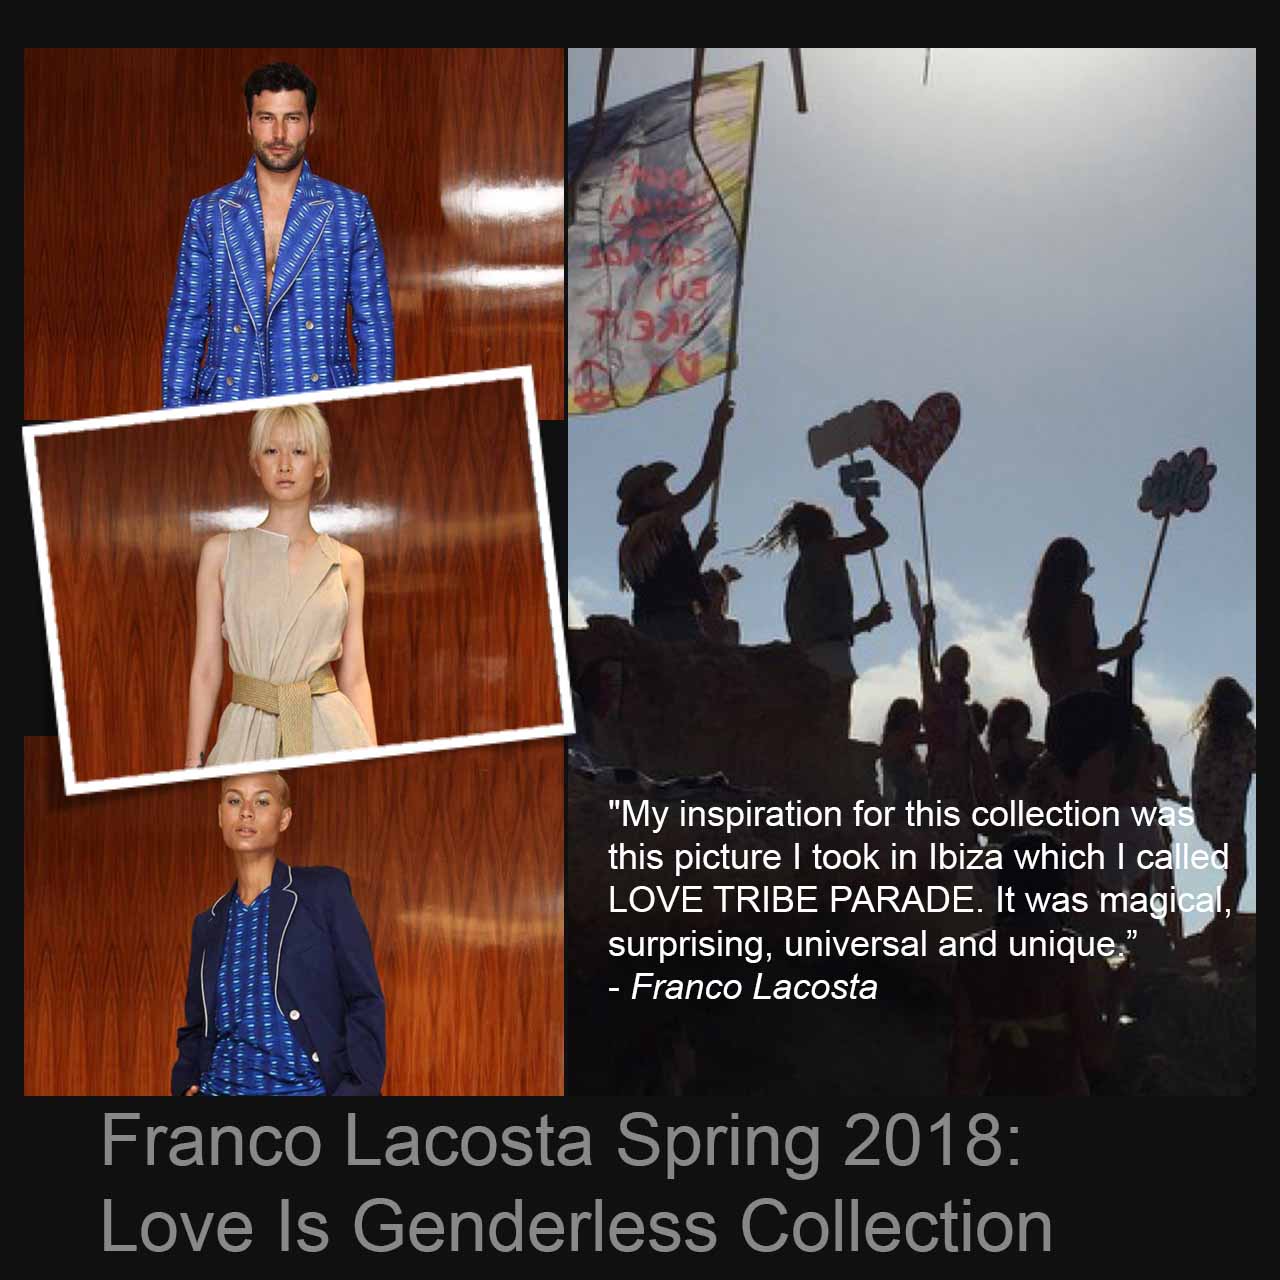 Franco Lacosta Spring 2018: Love Is Genderless Collection